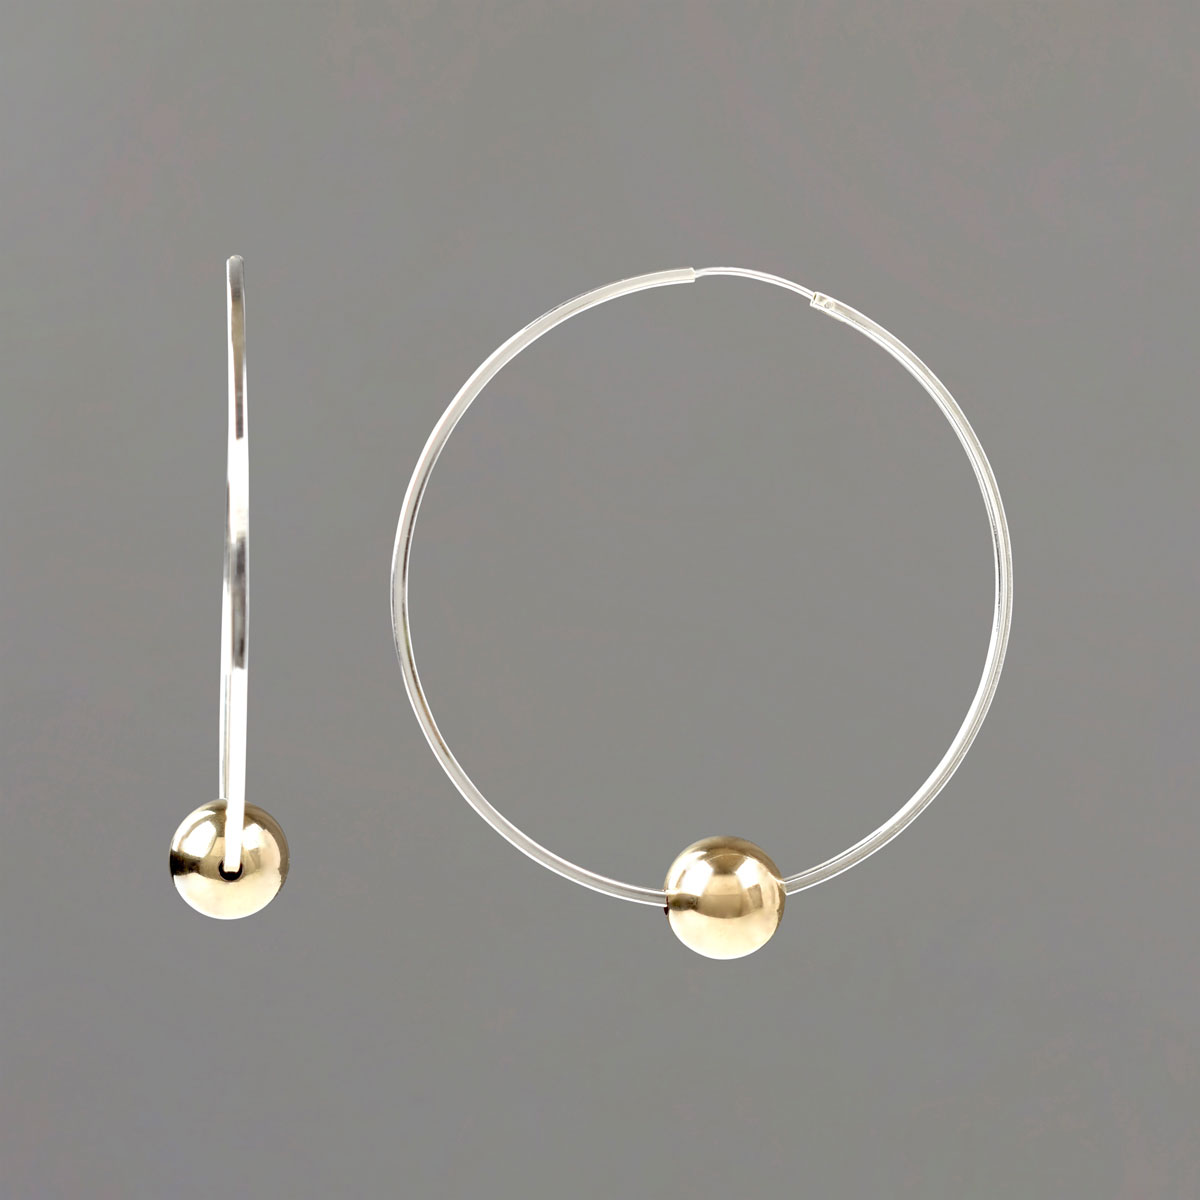 Sterling SIlver Hoop Earrings with Gold Filled Balls